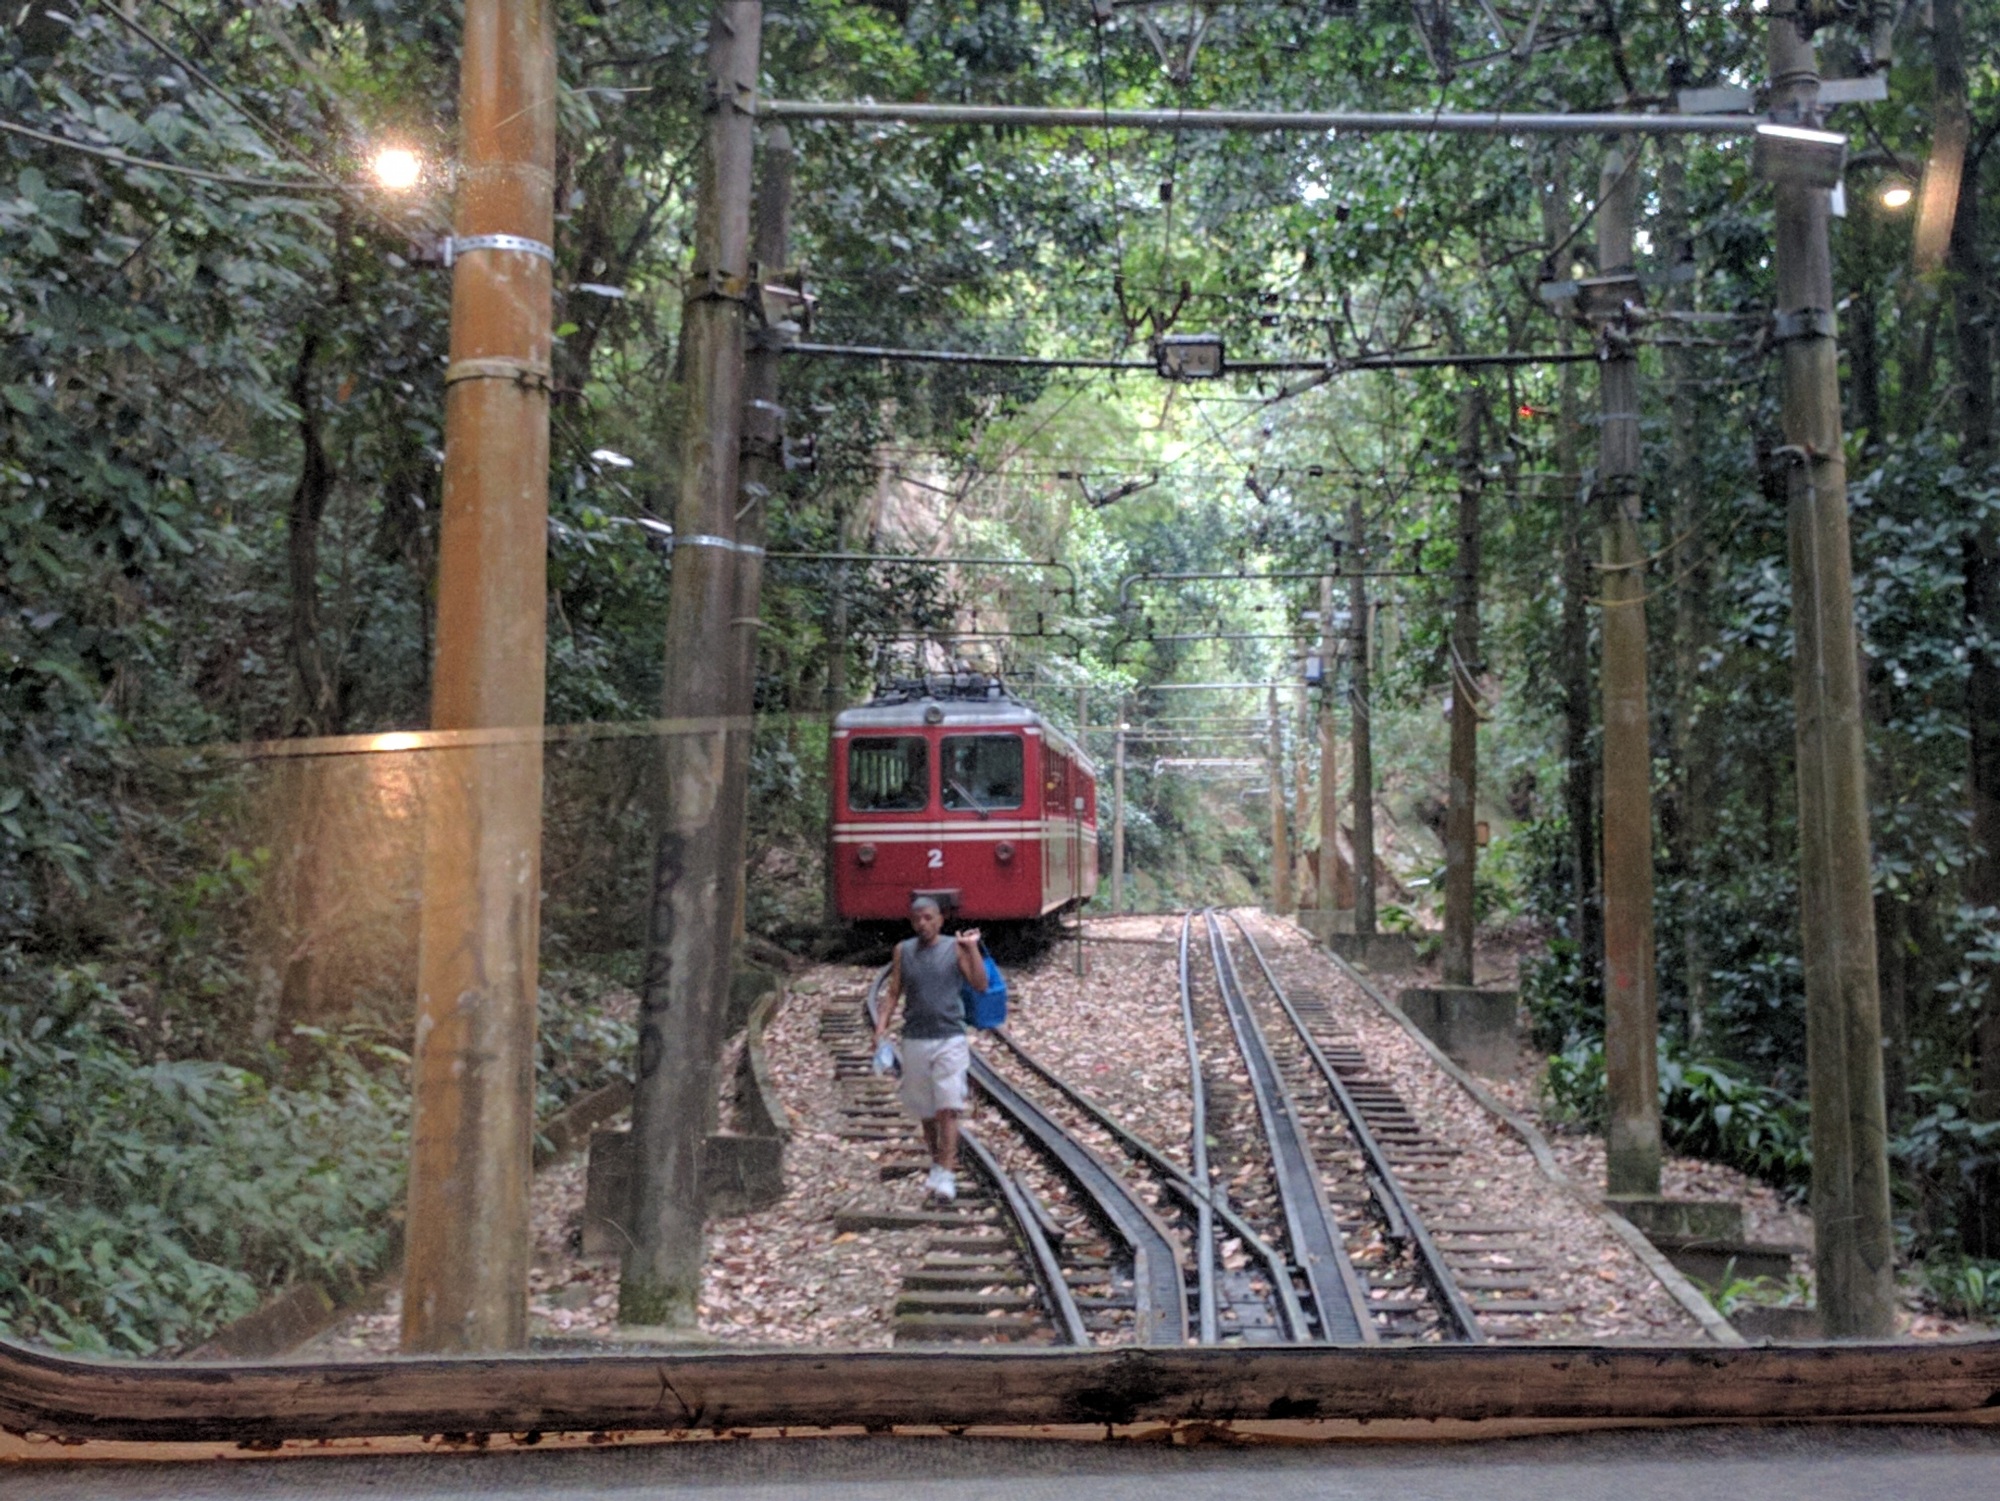 Image of the train that takes you to the Christ the Redeemer statue platform